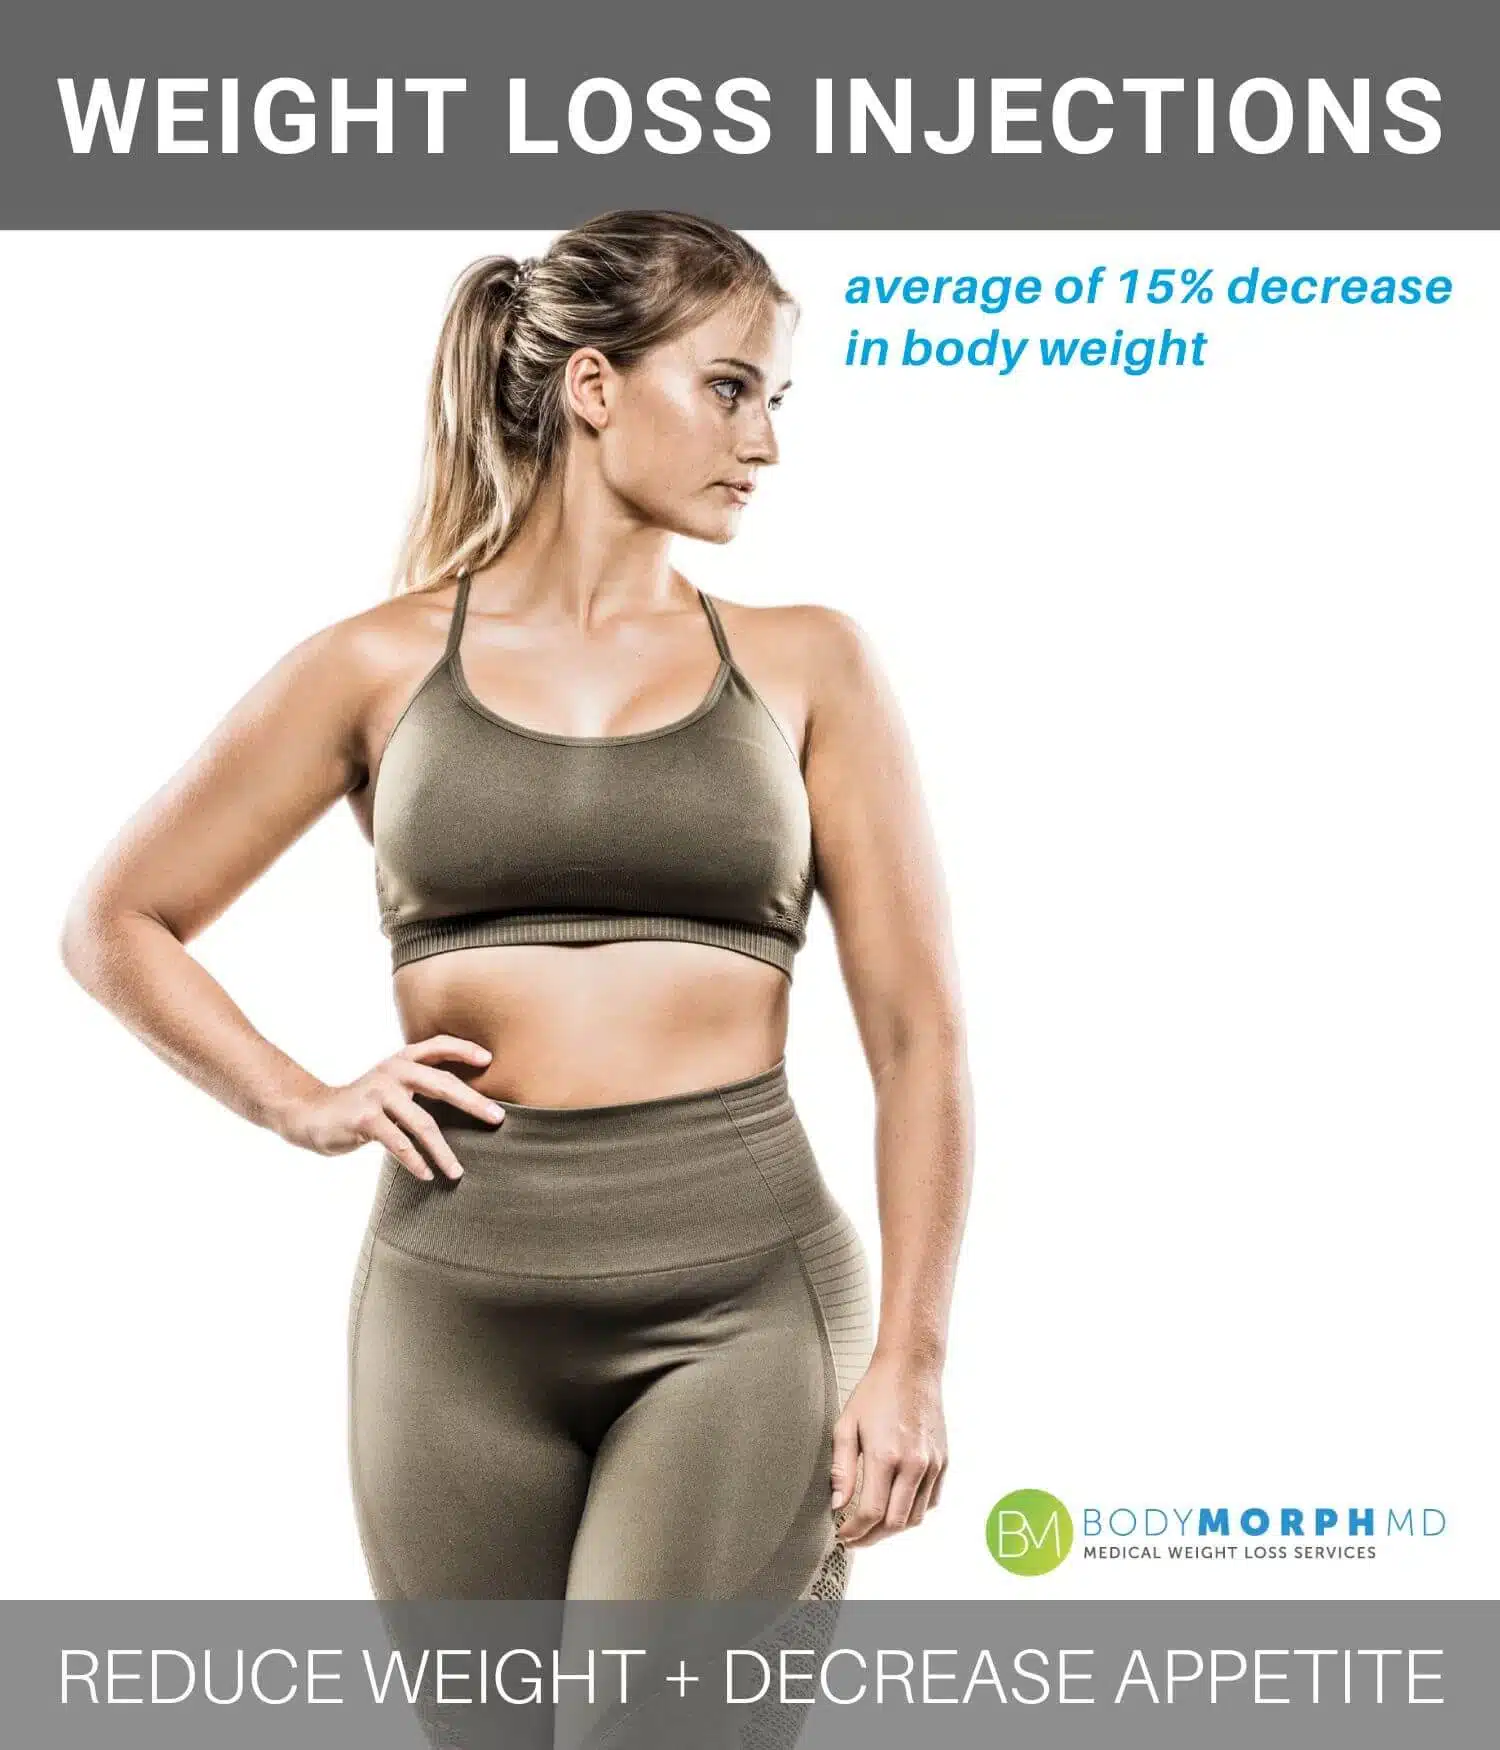 Curvy woman promoting Weight loss injections offered at Body Morph MD in Naples, FL